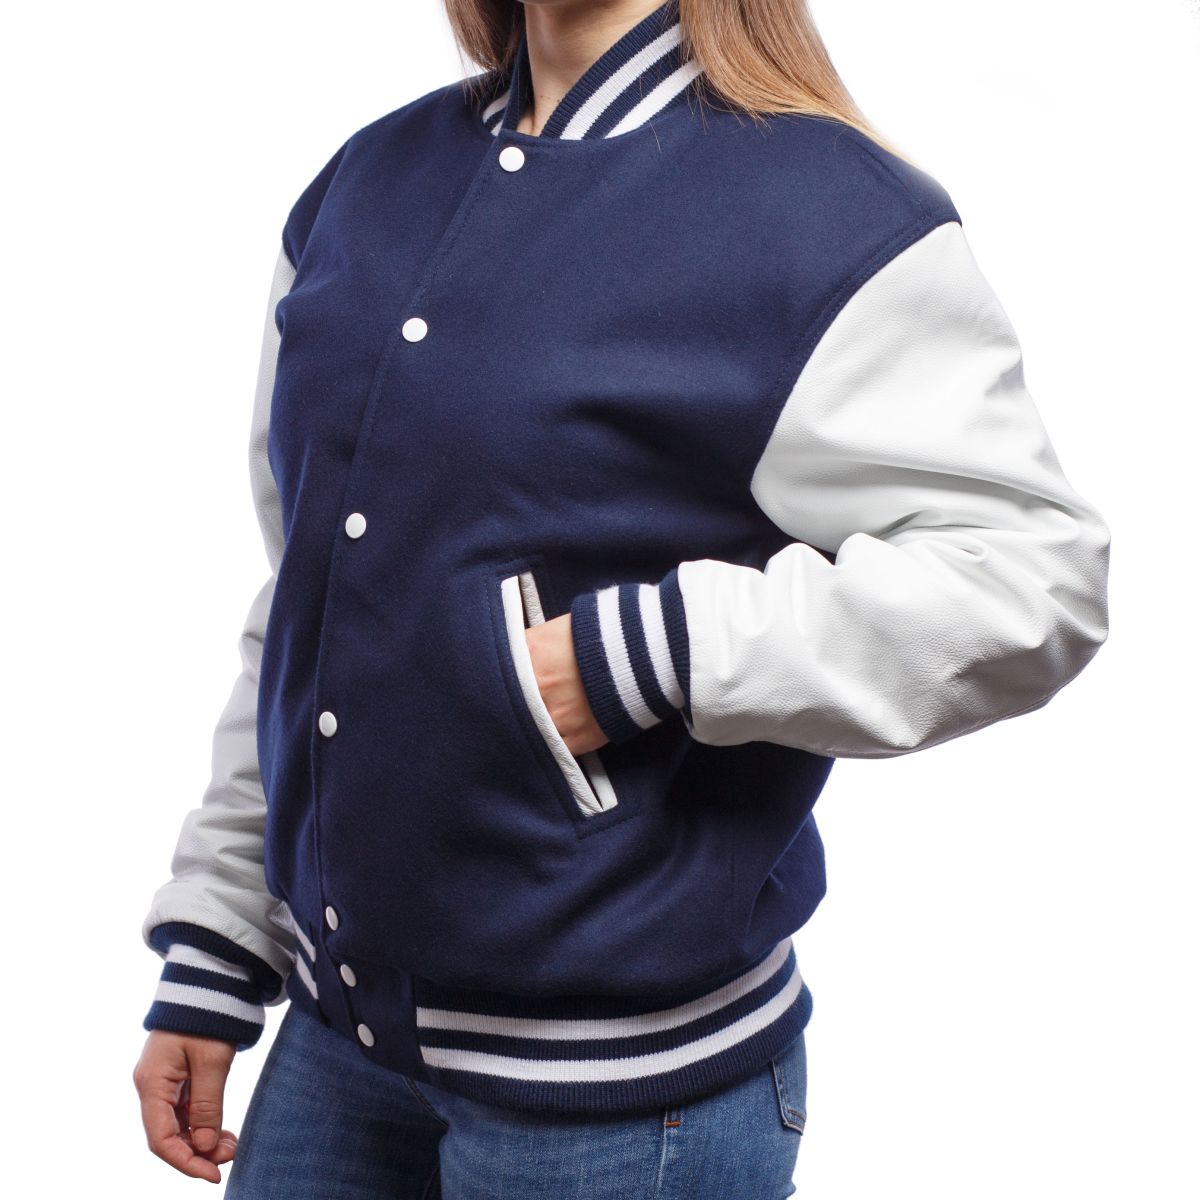 Womens' White and Blue Letterman Jacket